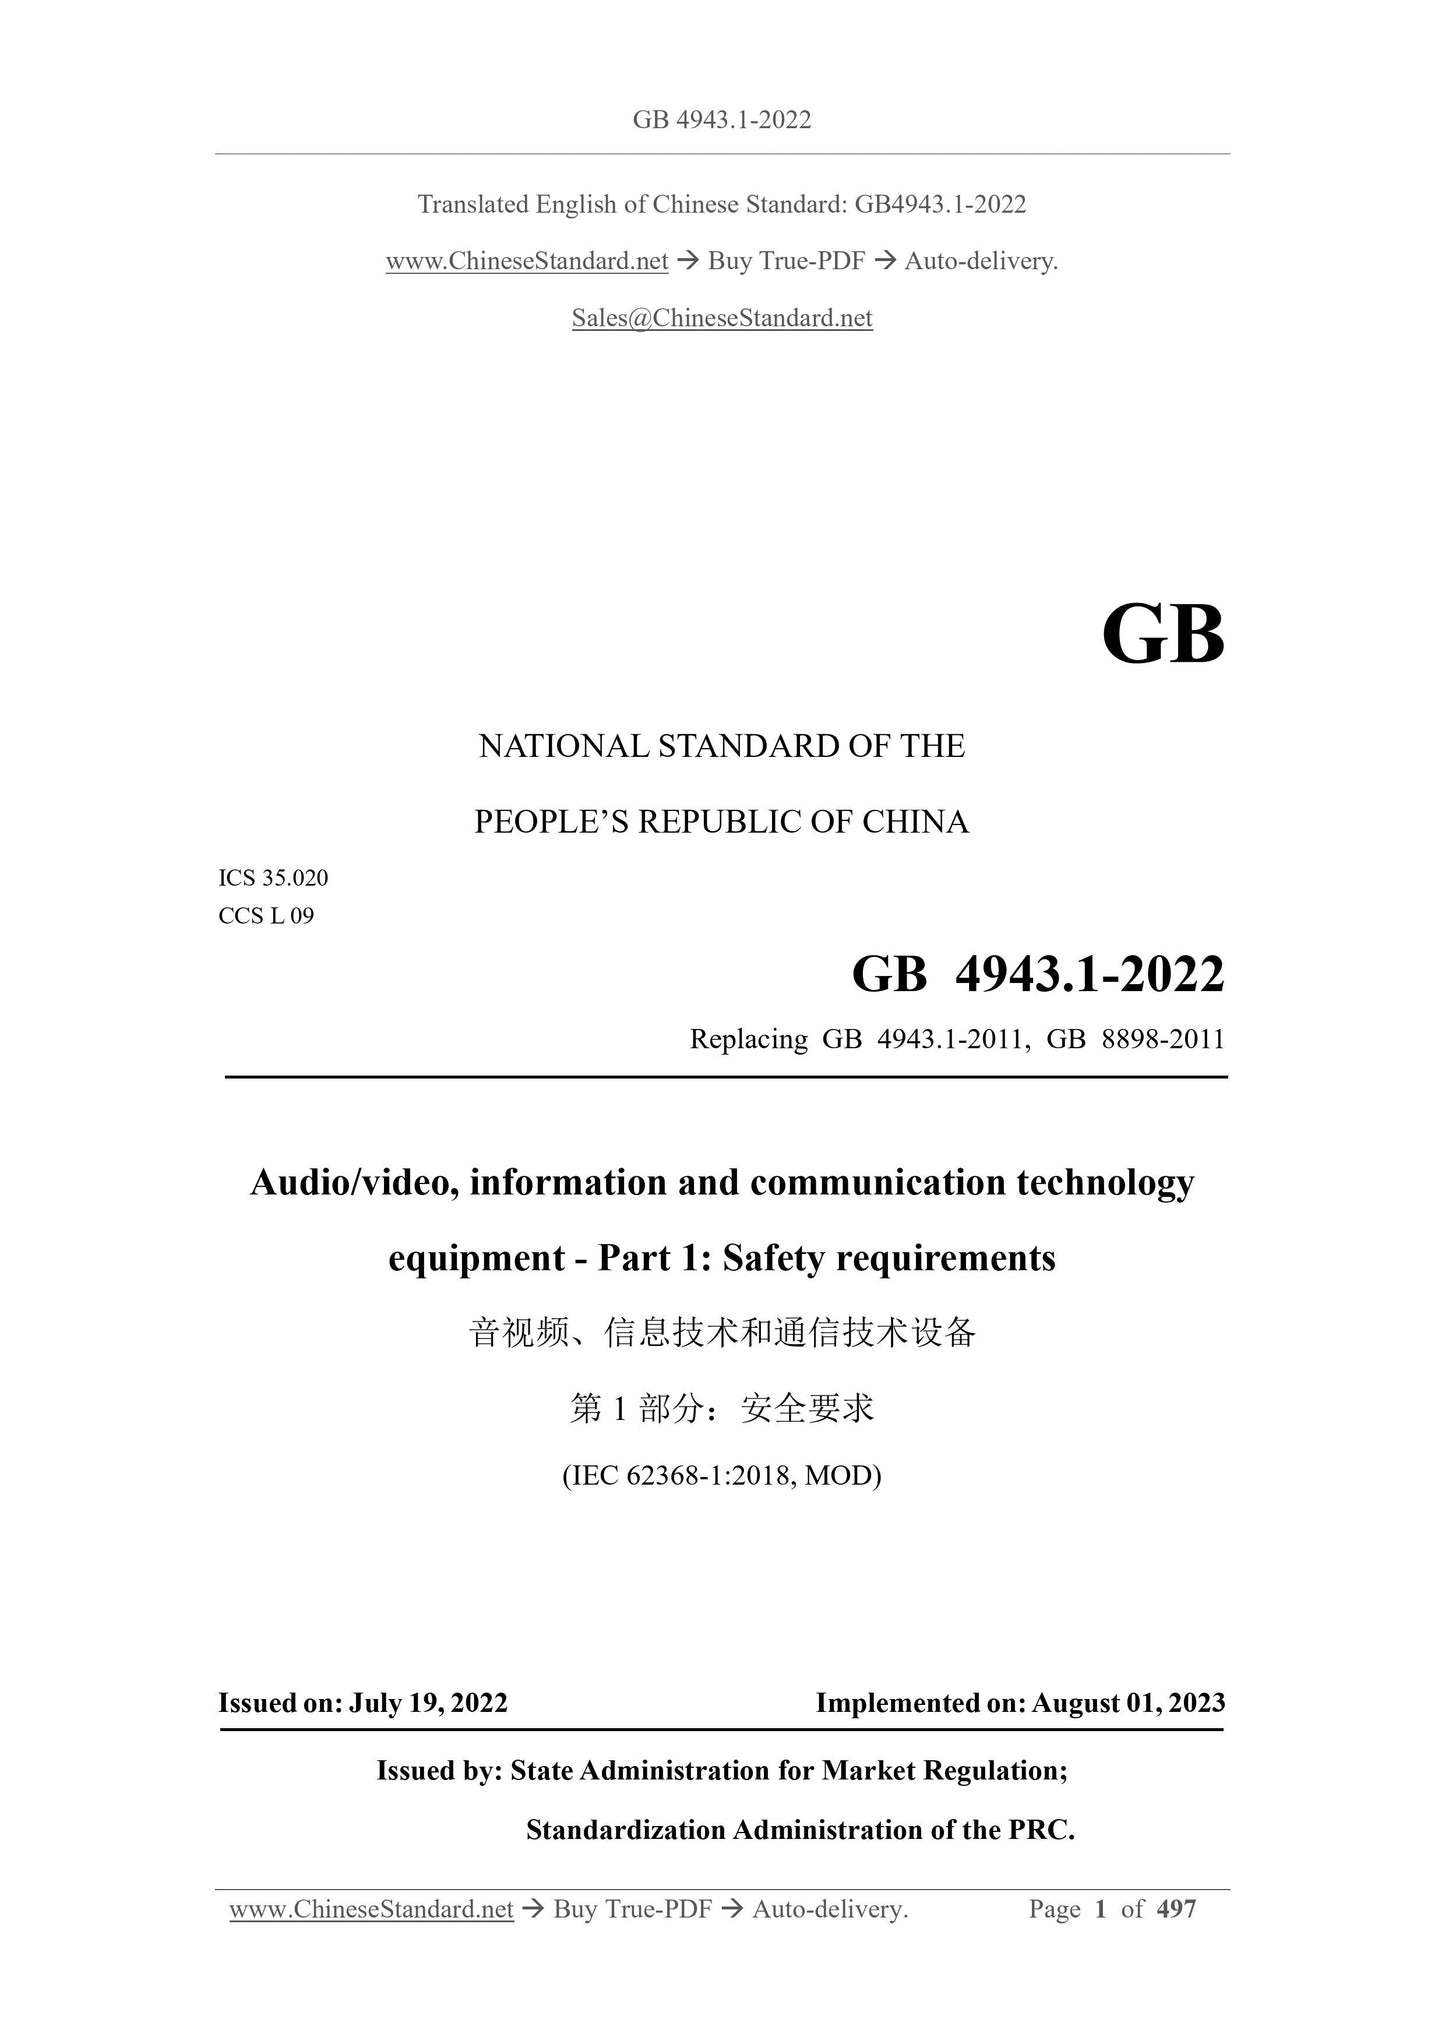 GB 4943.1-2022 Page 1